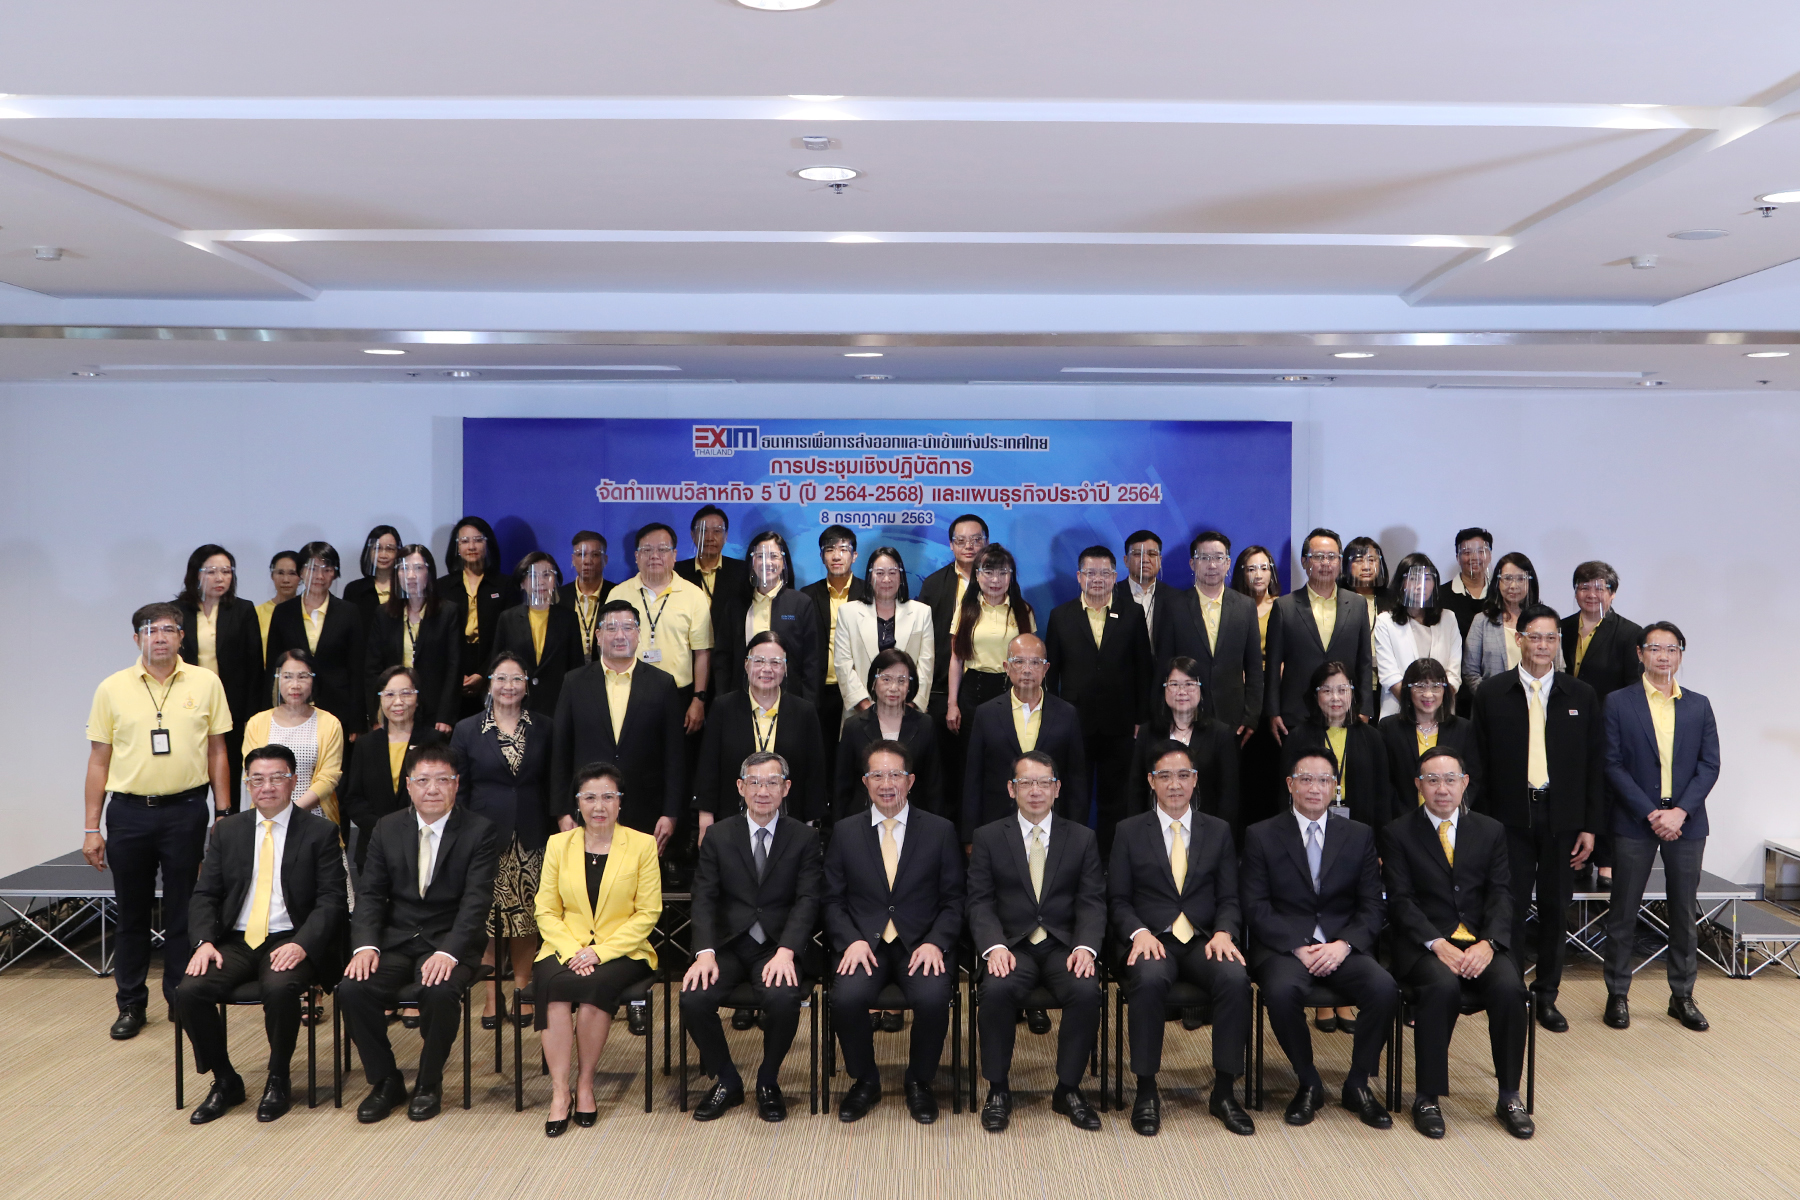 EXIM Thailand Holds Workshop on 5-year Enterprise Plan (2021-2025) and Business Plan 2021